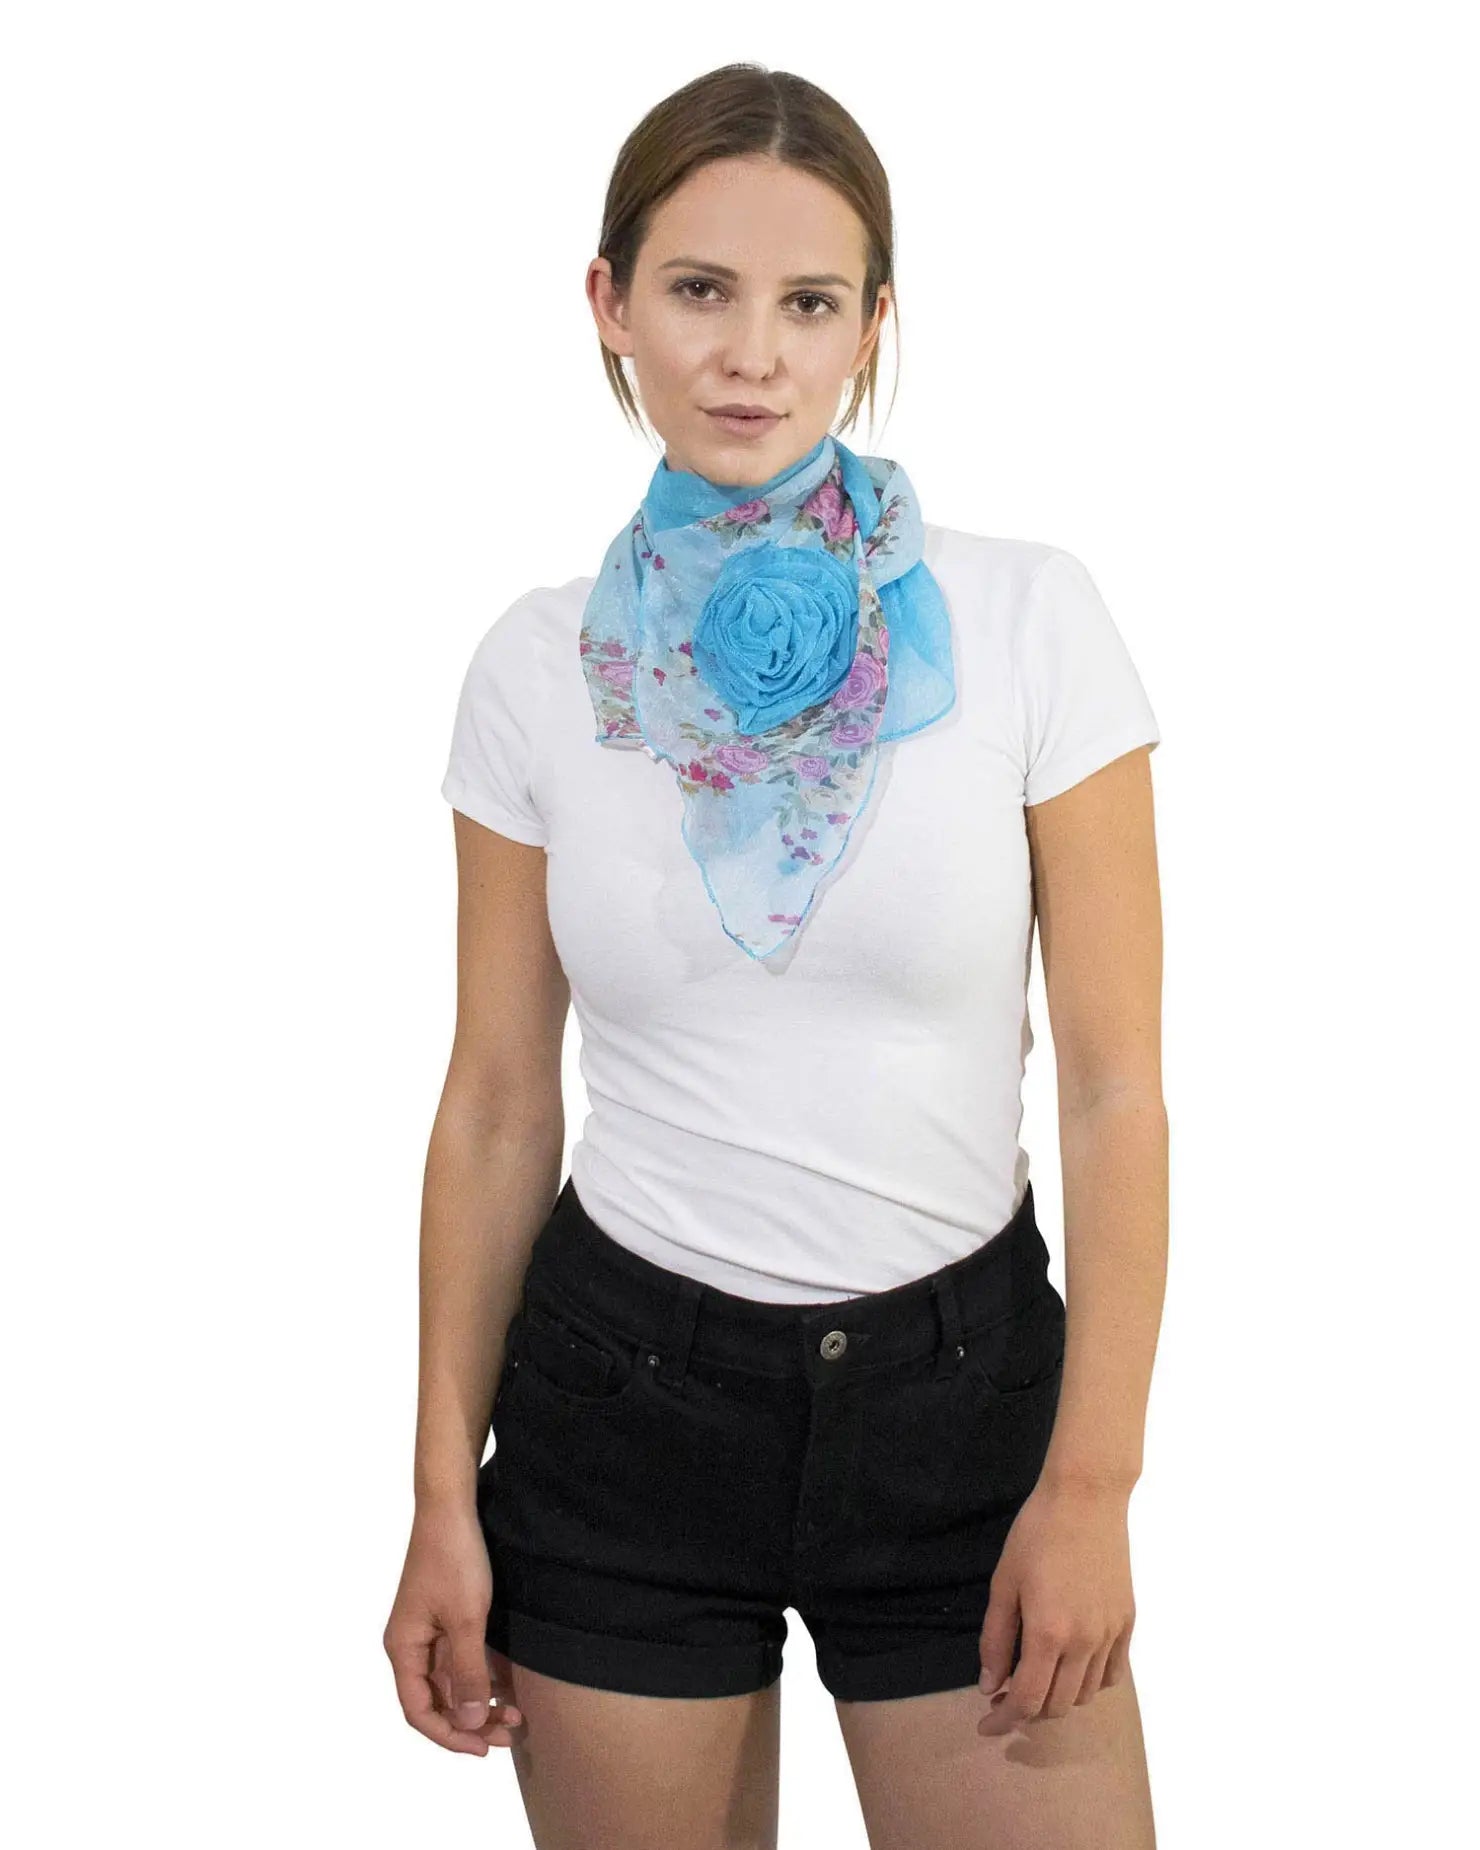 Woman in white t-shirt and black shorts wearing Elegant Floral Print Chiffon Scarf with Detachable 3D Flower Pin